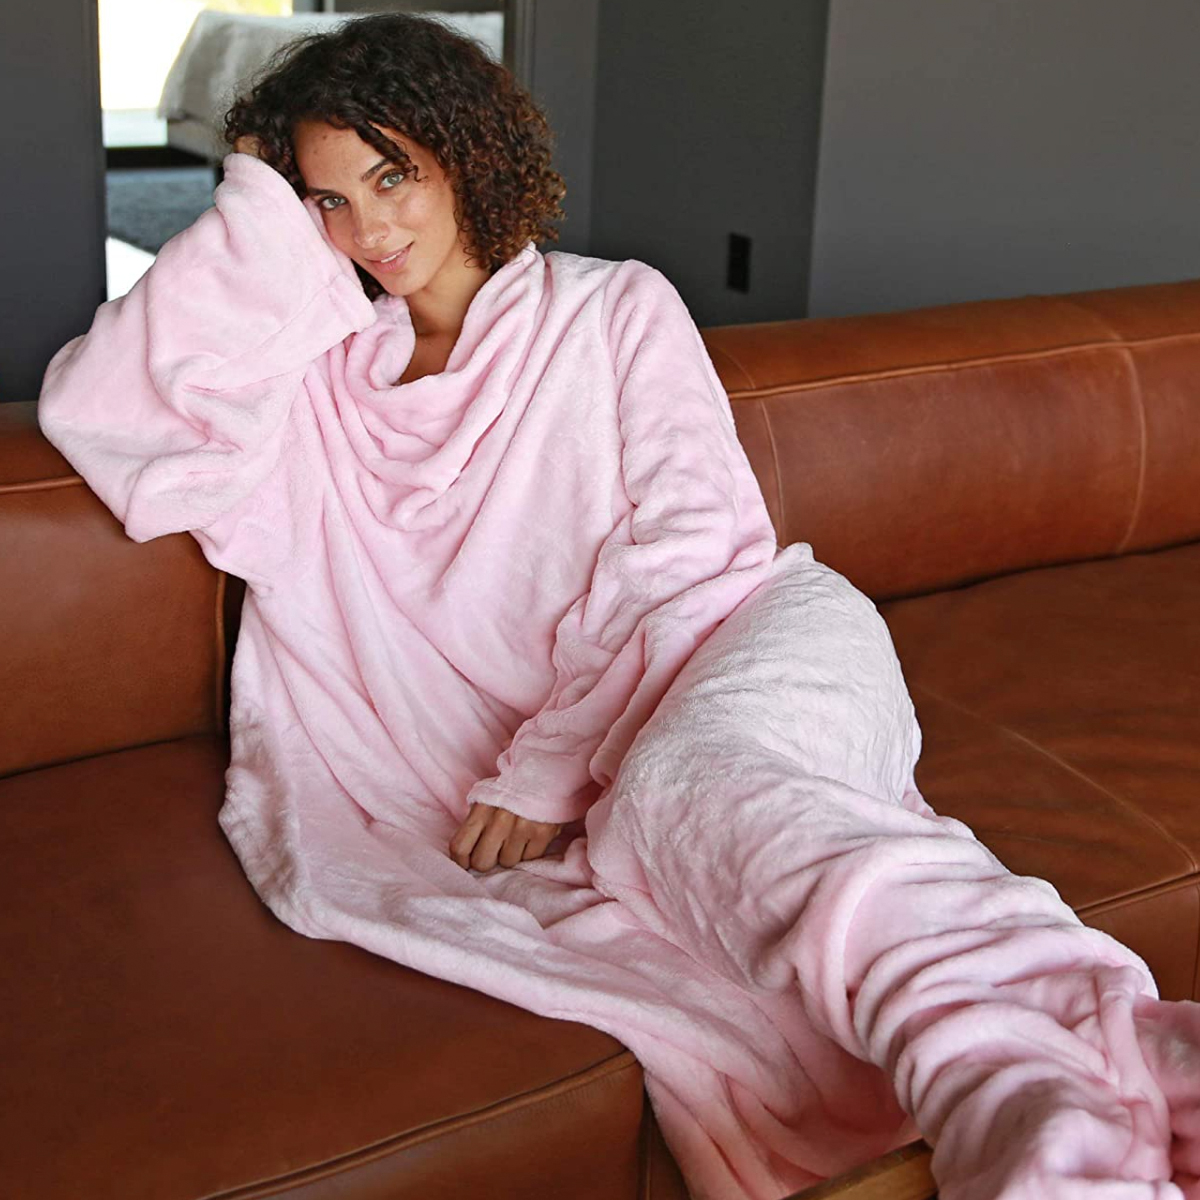 https://akns-images.eonline.com/eol_images/Entire_Site/20221014/rs_1200x1200-221114143715-wearable-blanket-1200-.jpg?fit=around%7C1200:1200&output-quality=90&crop=1200:1200;center,top